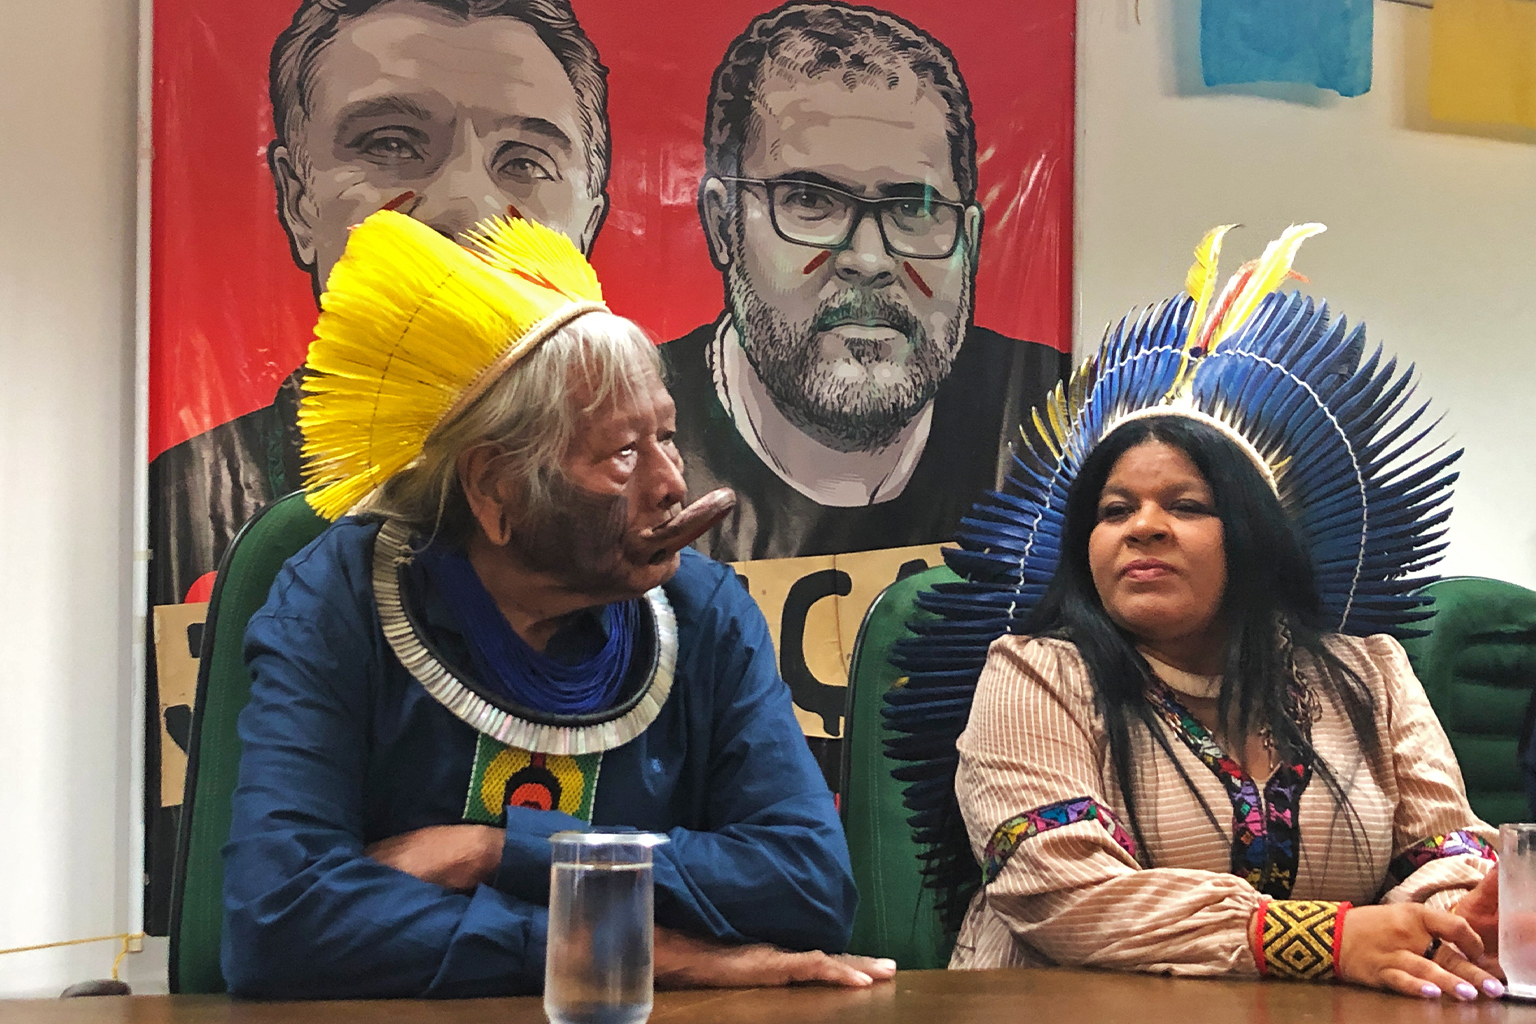 92-year old Indigenous Chief Raoni Metuktire, of the Kayapó people, and Sonia Guajajara at the headquarters of the country's Indigenous affairs agency (Funai) in Brasília. Image by Karla Mendes/Mongabay.